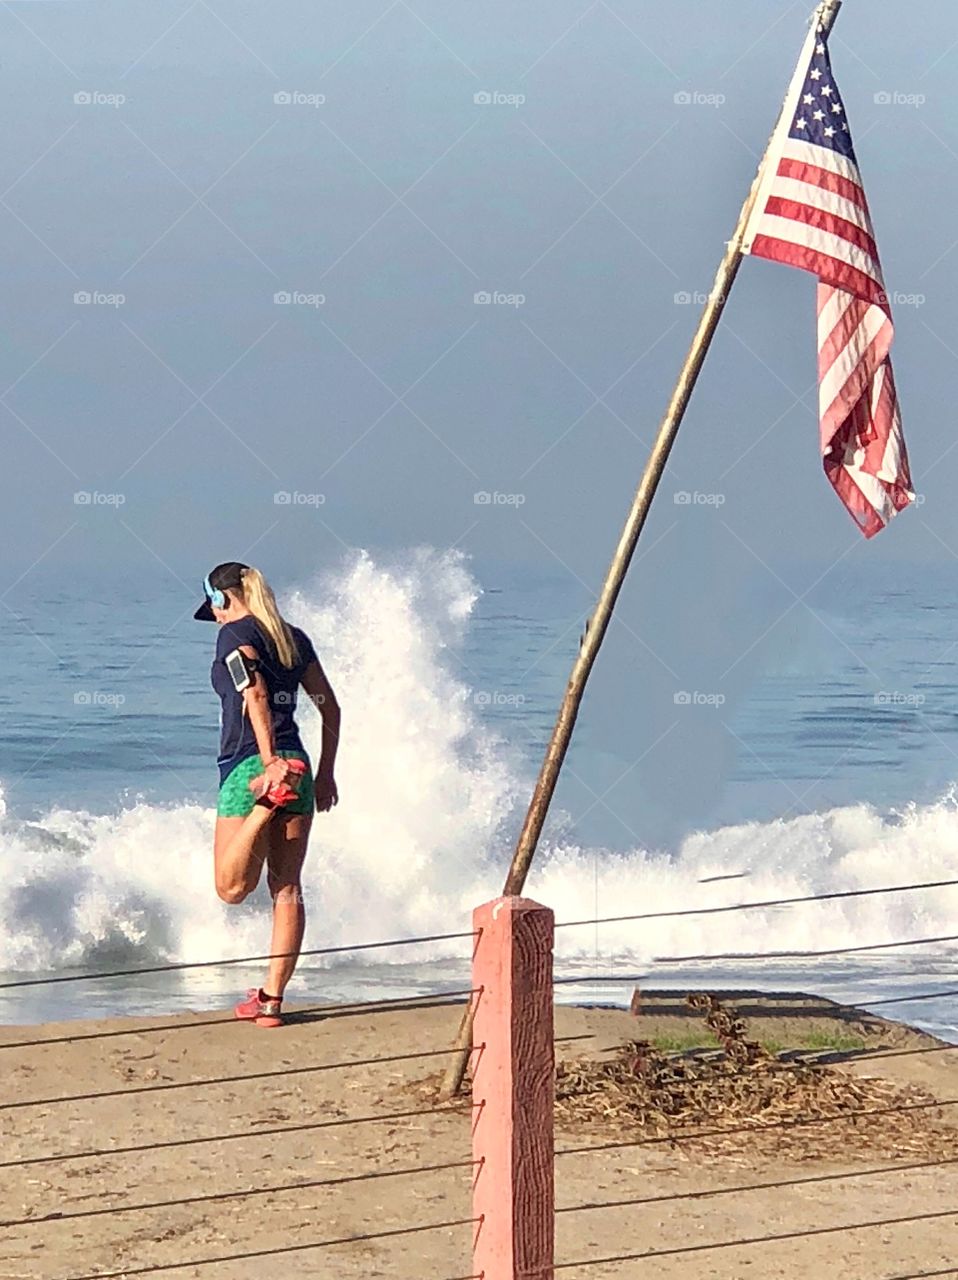 Foap Mission Staying In Shape! Woman Exercising On The Beach With an American Flag 